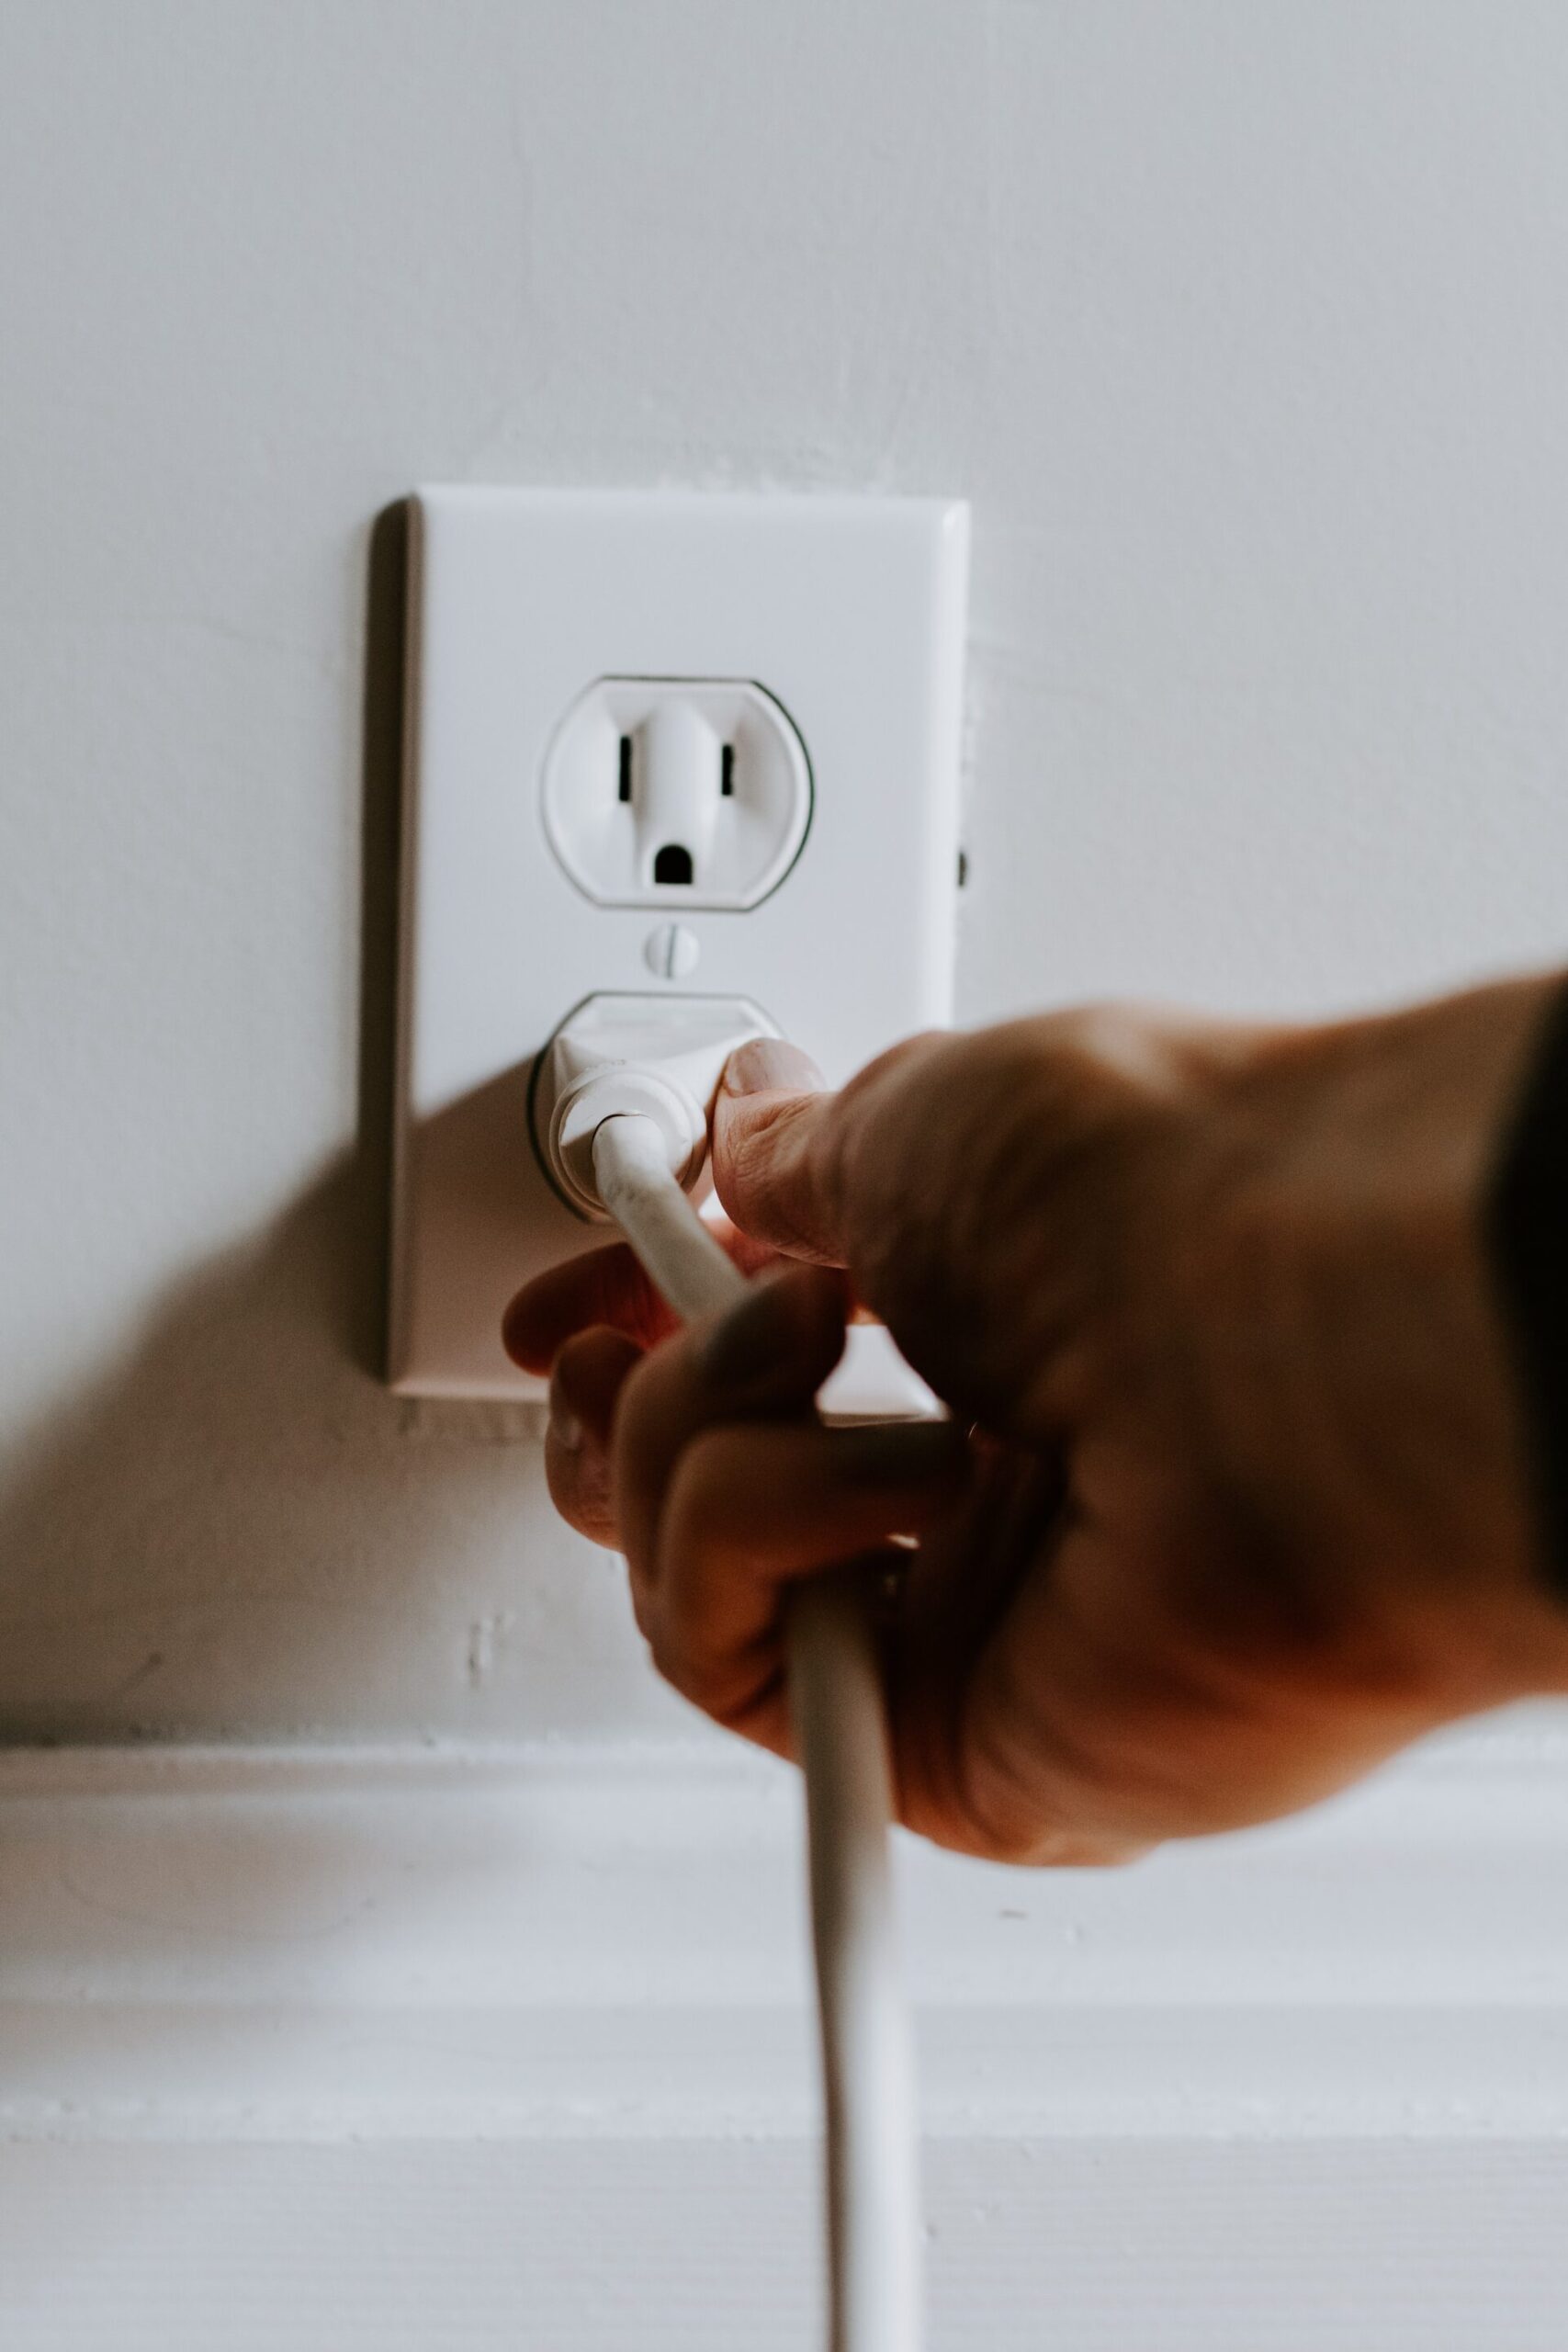 A hand plugging a cord into an electrical outlet.